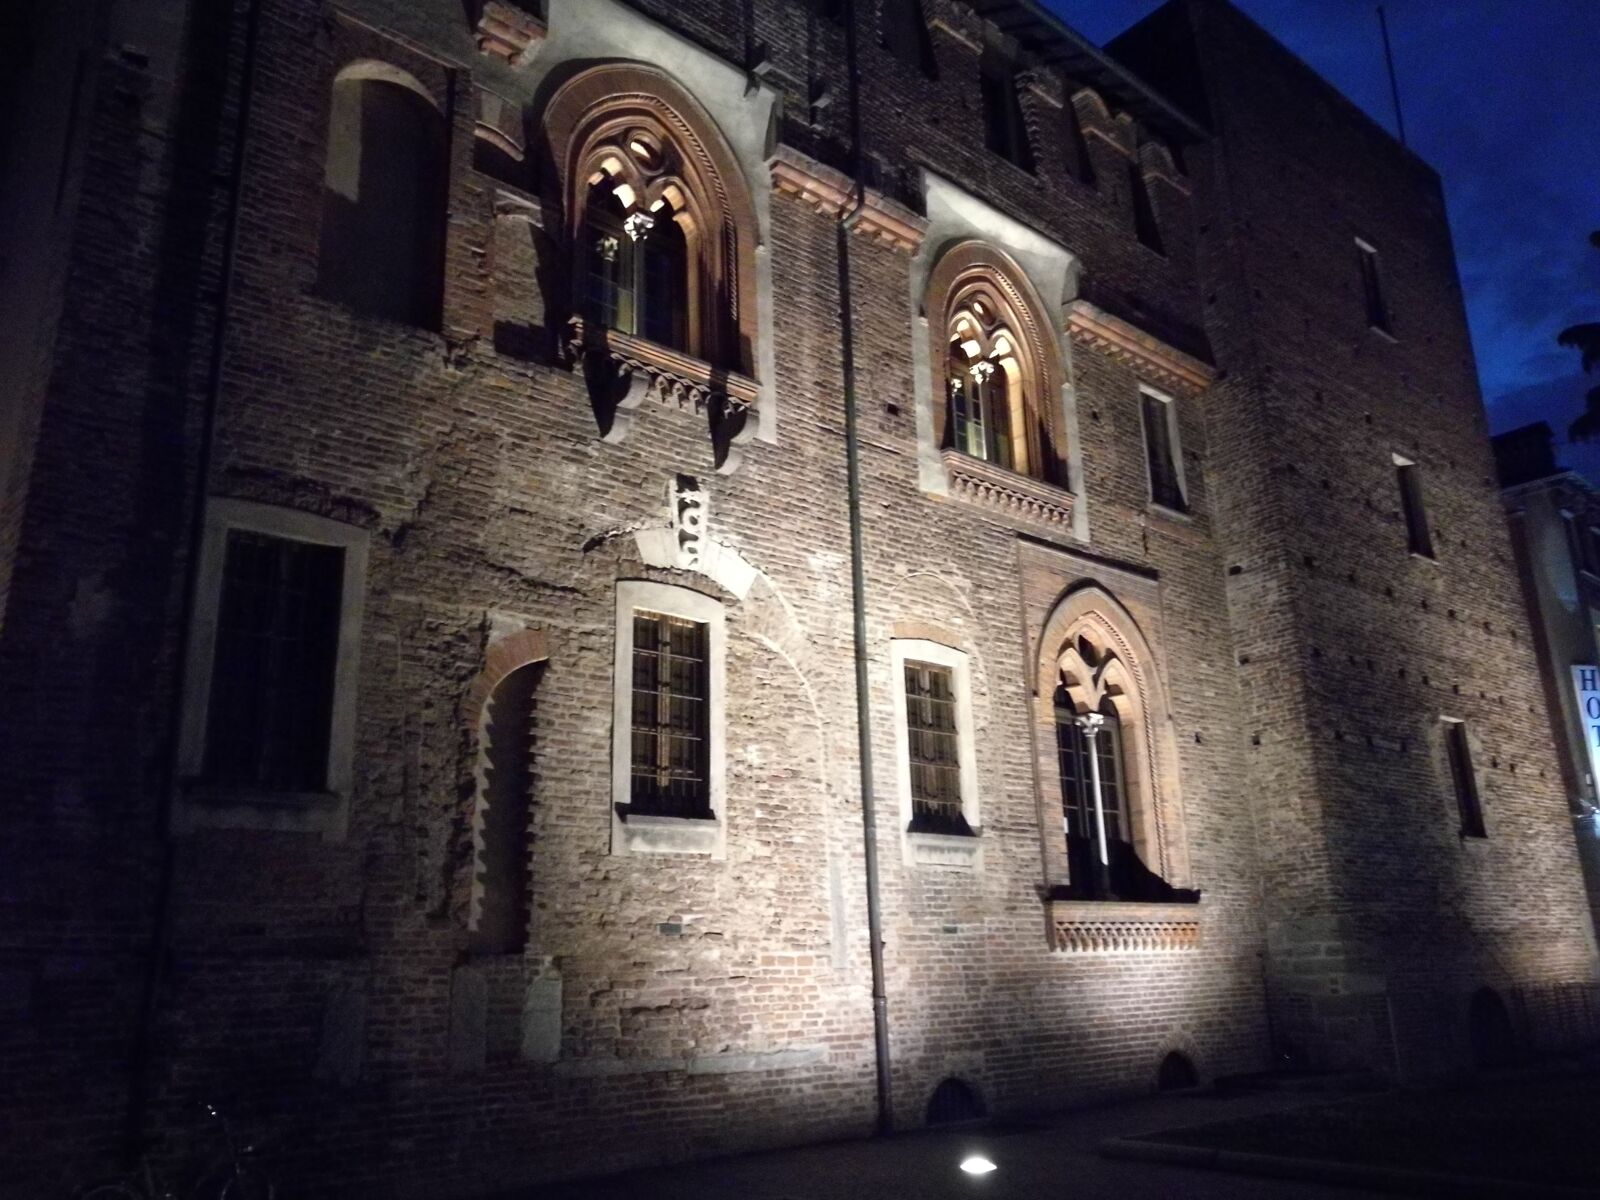 HUAWEI P9 Plus sample photo. Castle, night, architecture photography